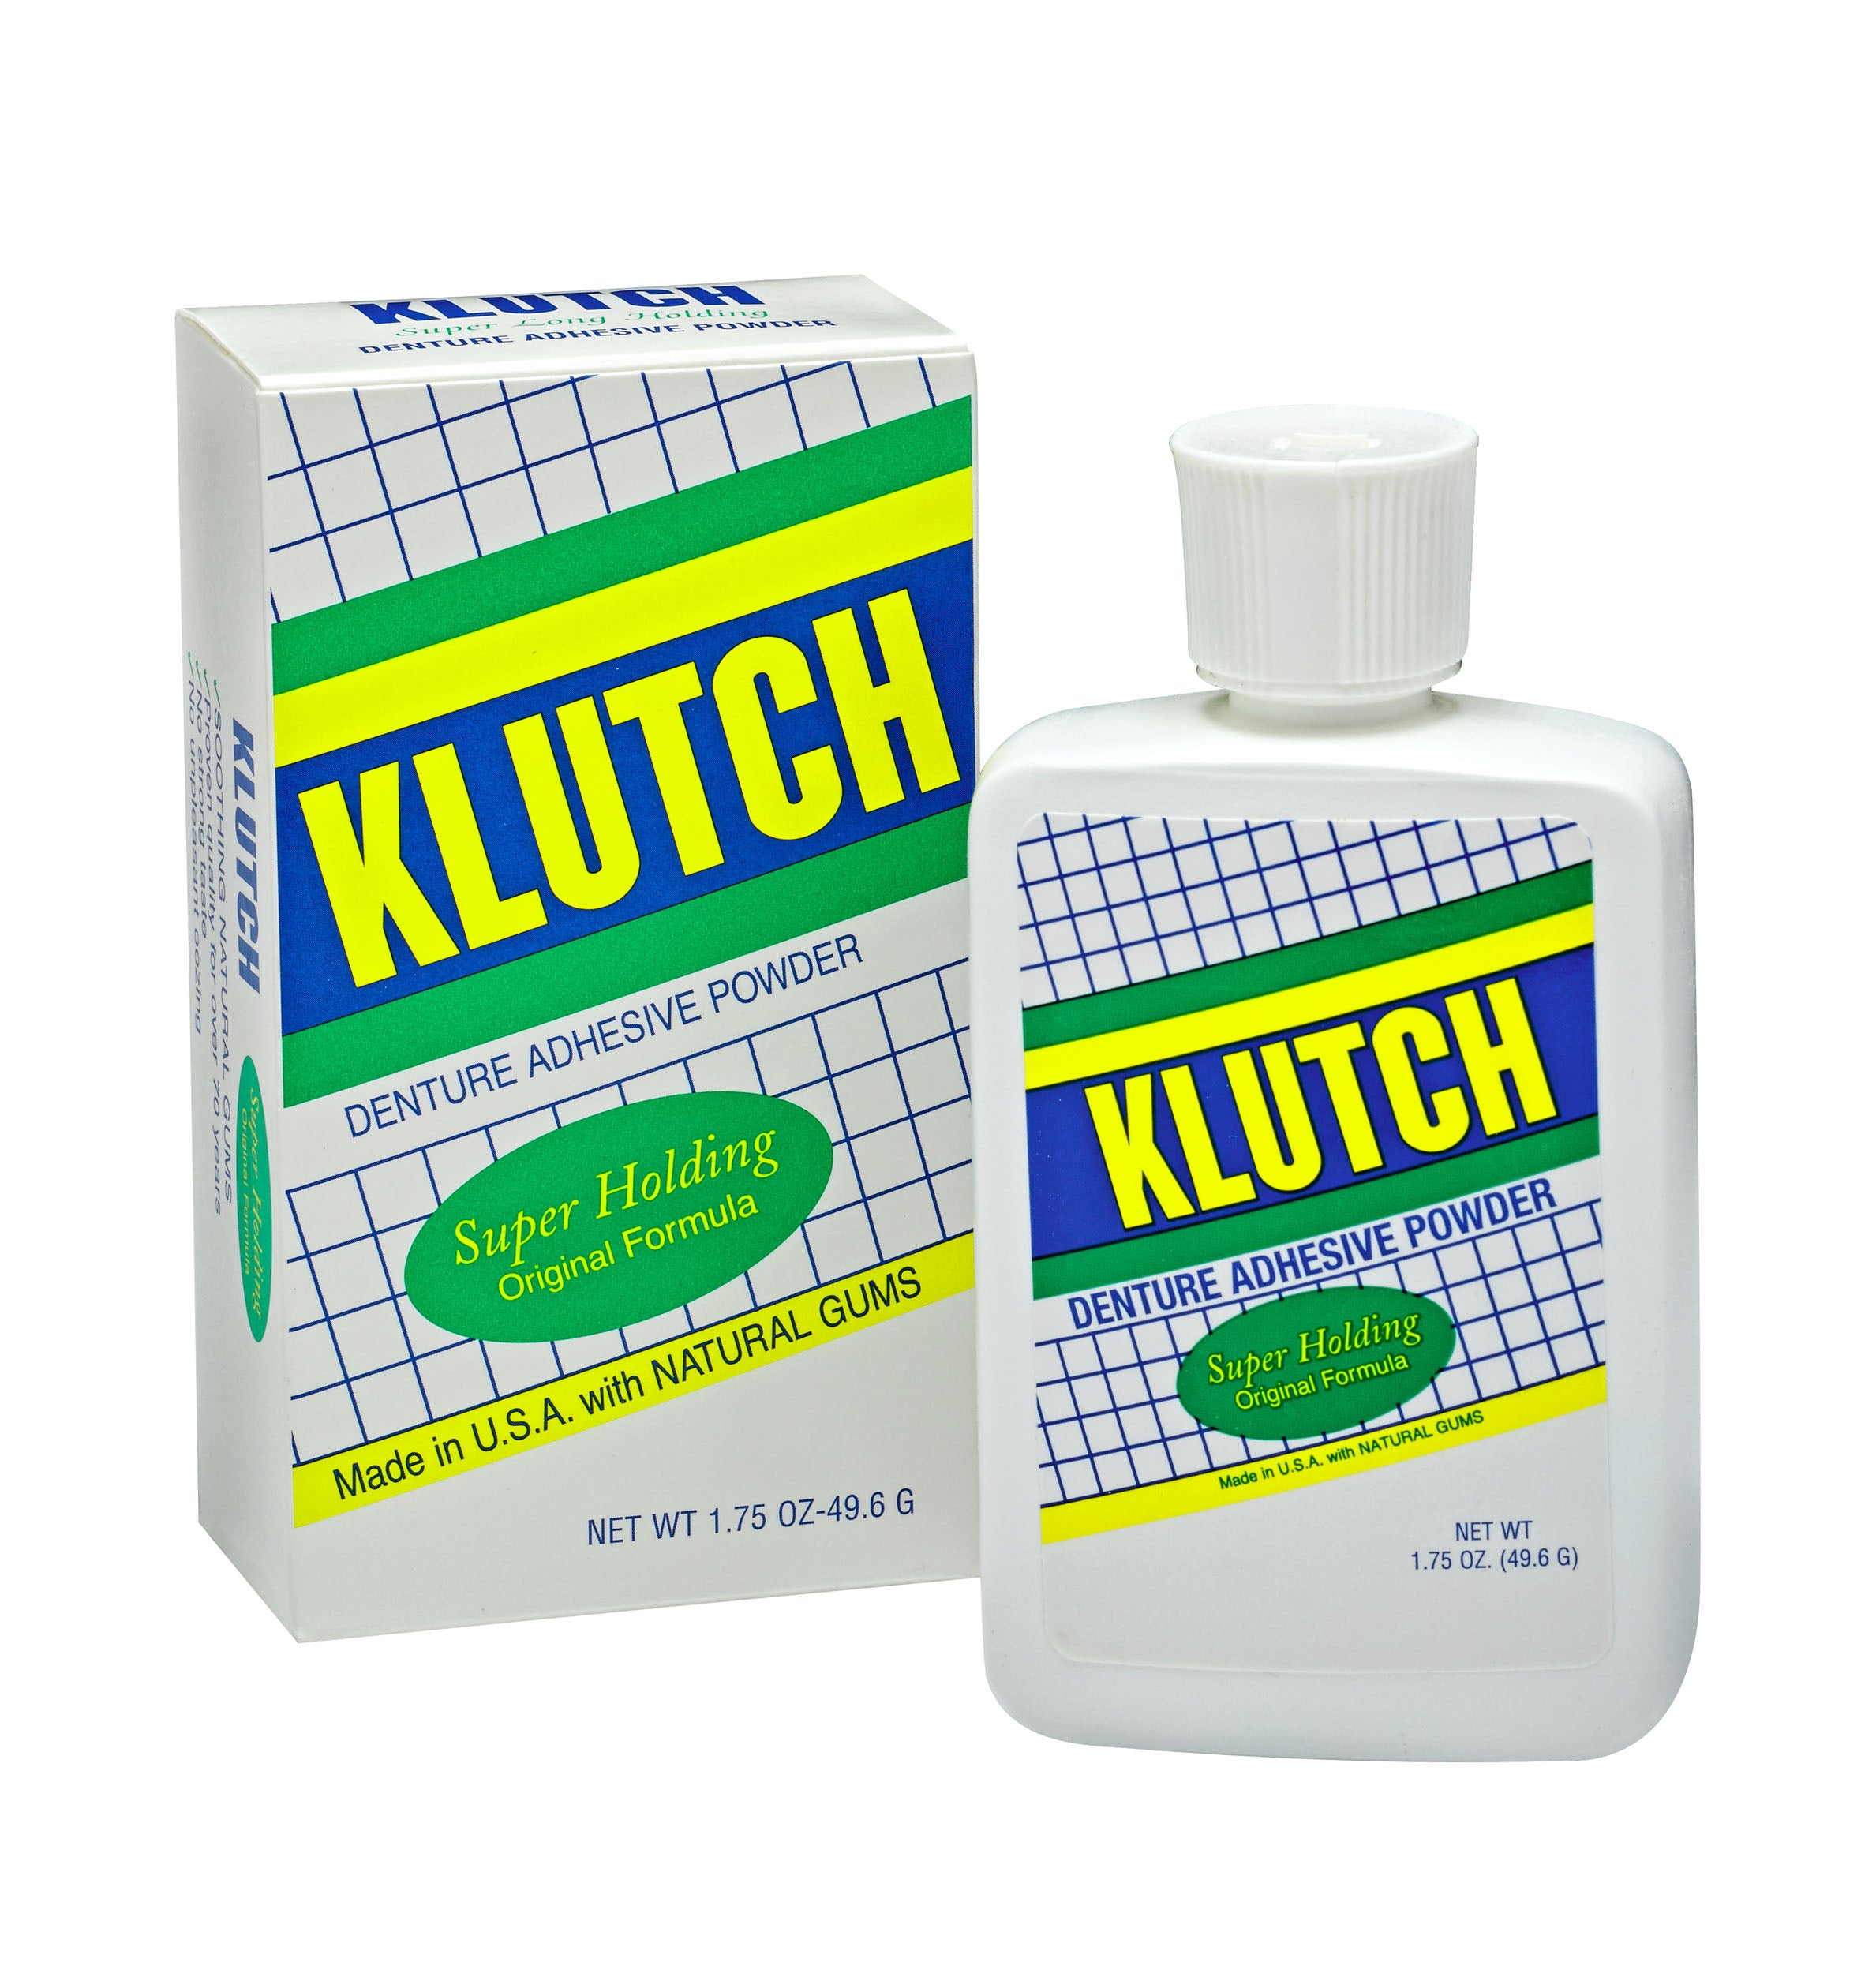 **KLUTCH Denture Adhesive Powder  1 DOZEN   $84.00    FOR A LIMITED TIME ONLY